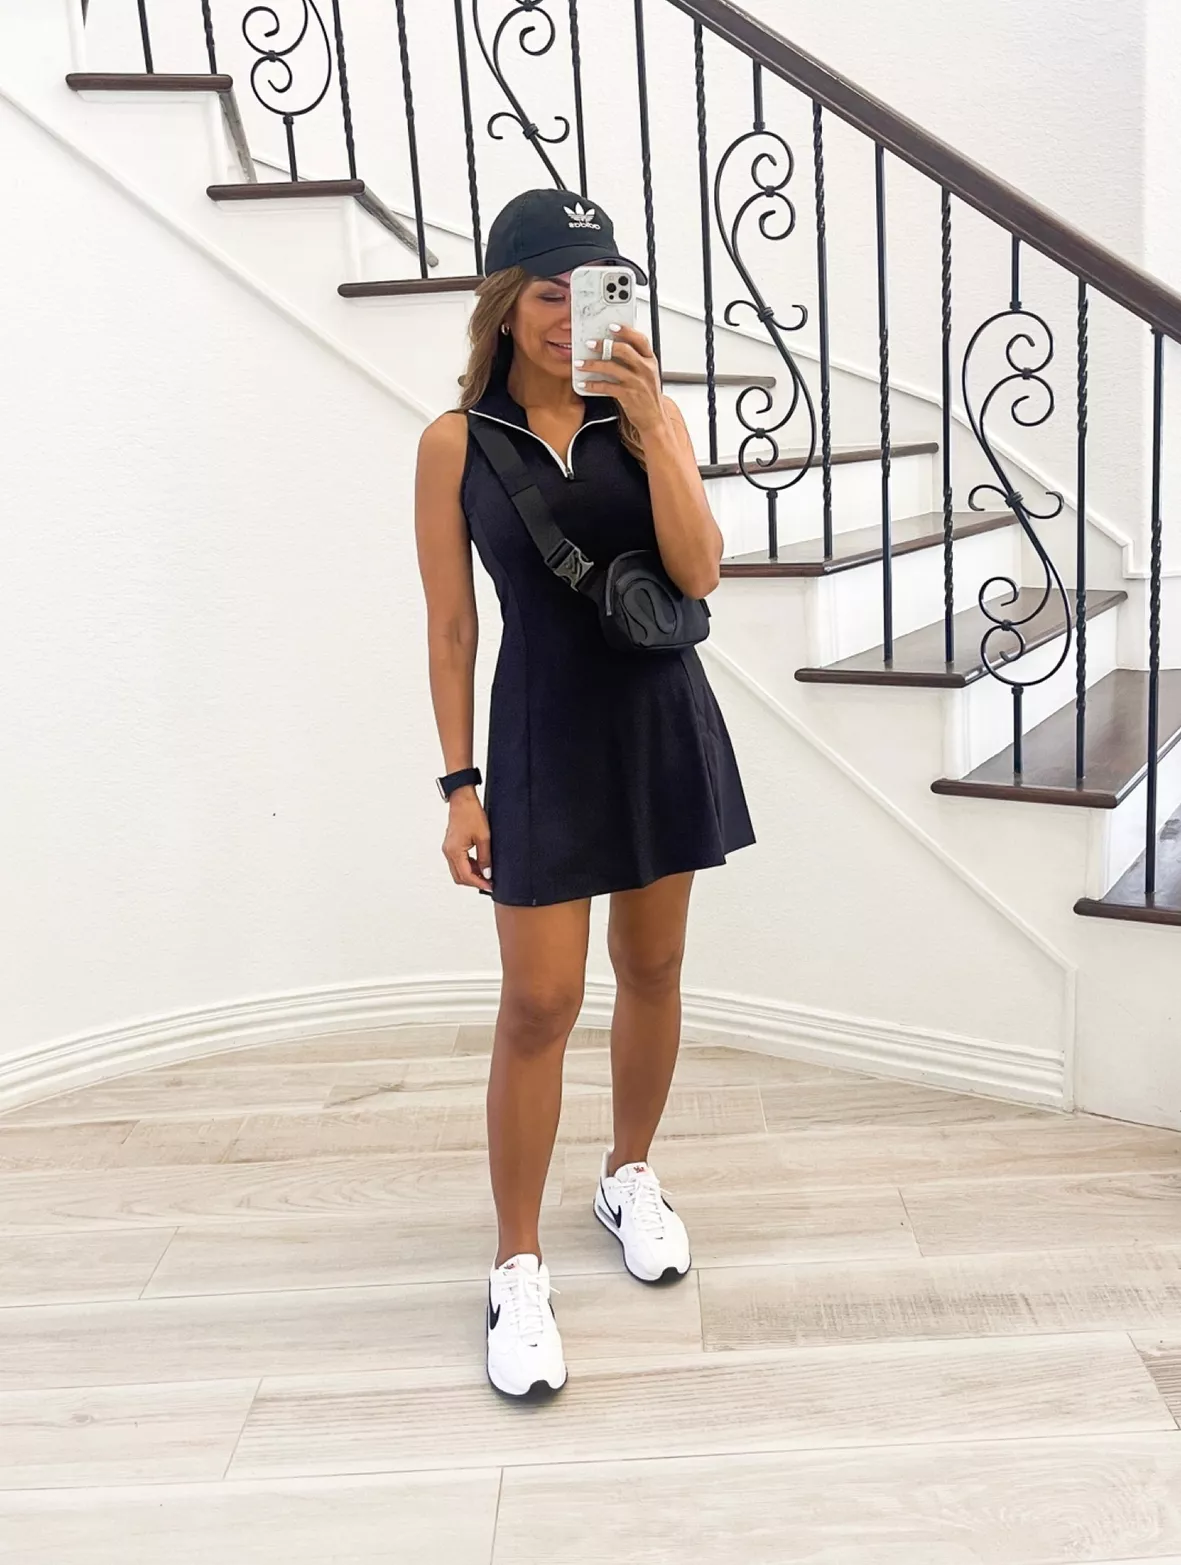  Womens Tennis Dress, Athletic Dress with Shorts Underneath &  Built-in Bra Workout Golf Dresses with Adjustable Straps Black XS :  Clothing, Shoes & Jewelry